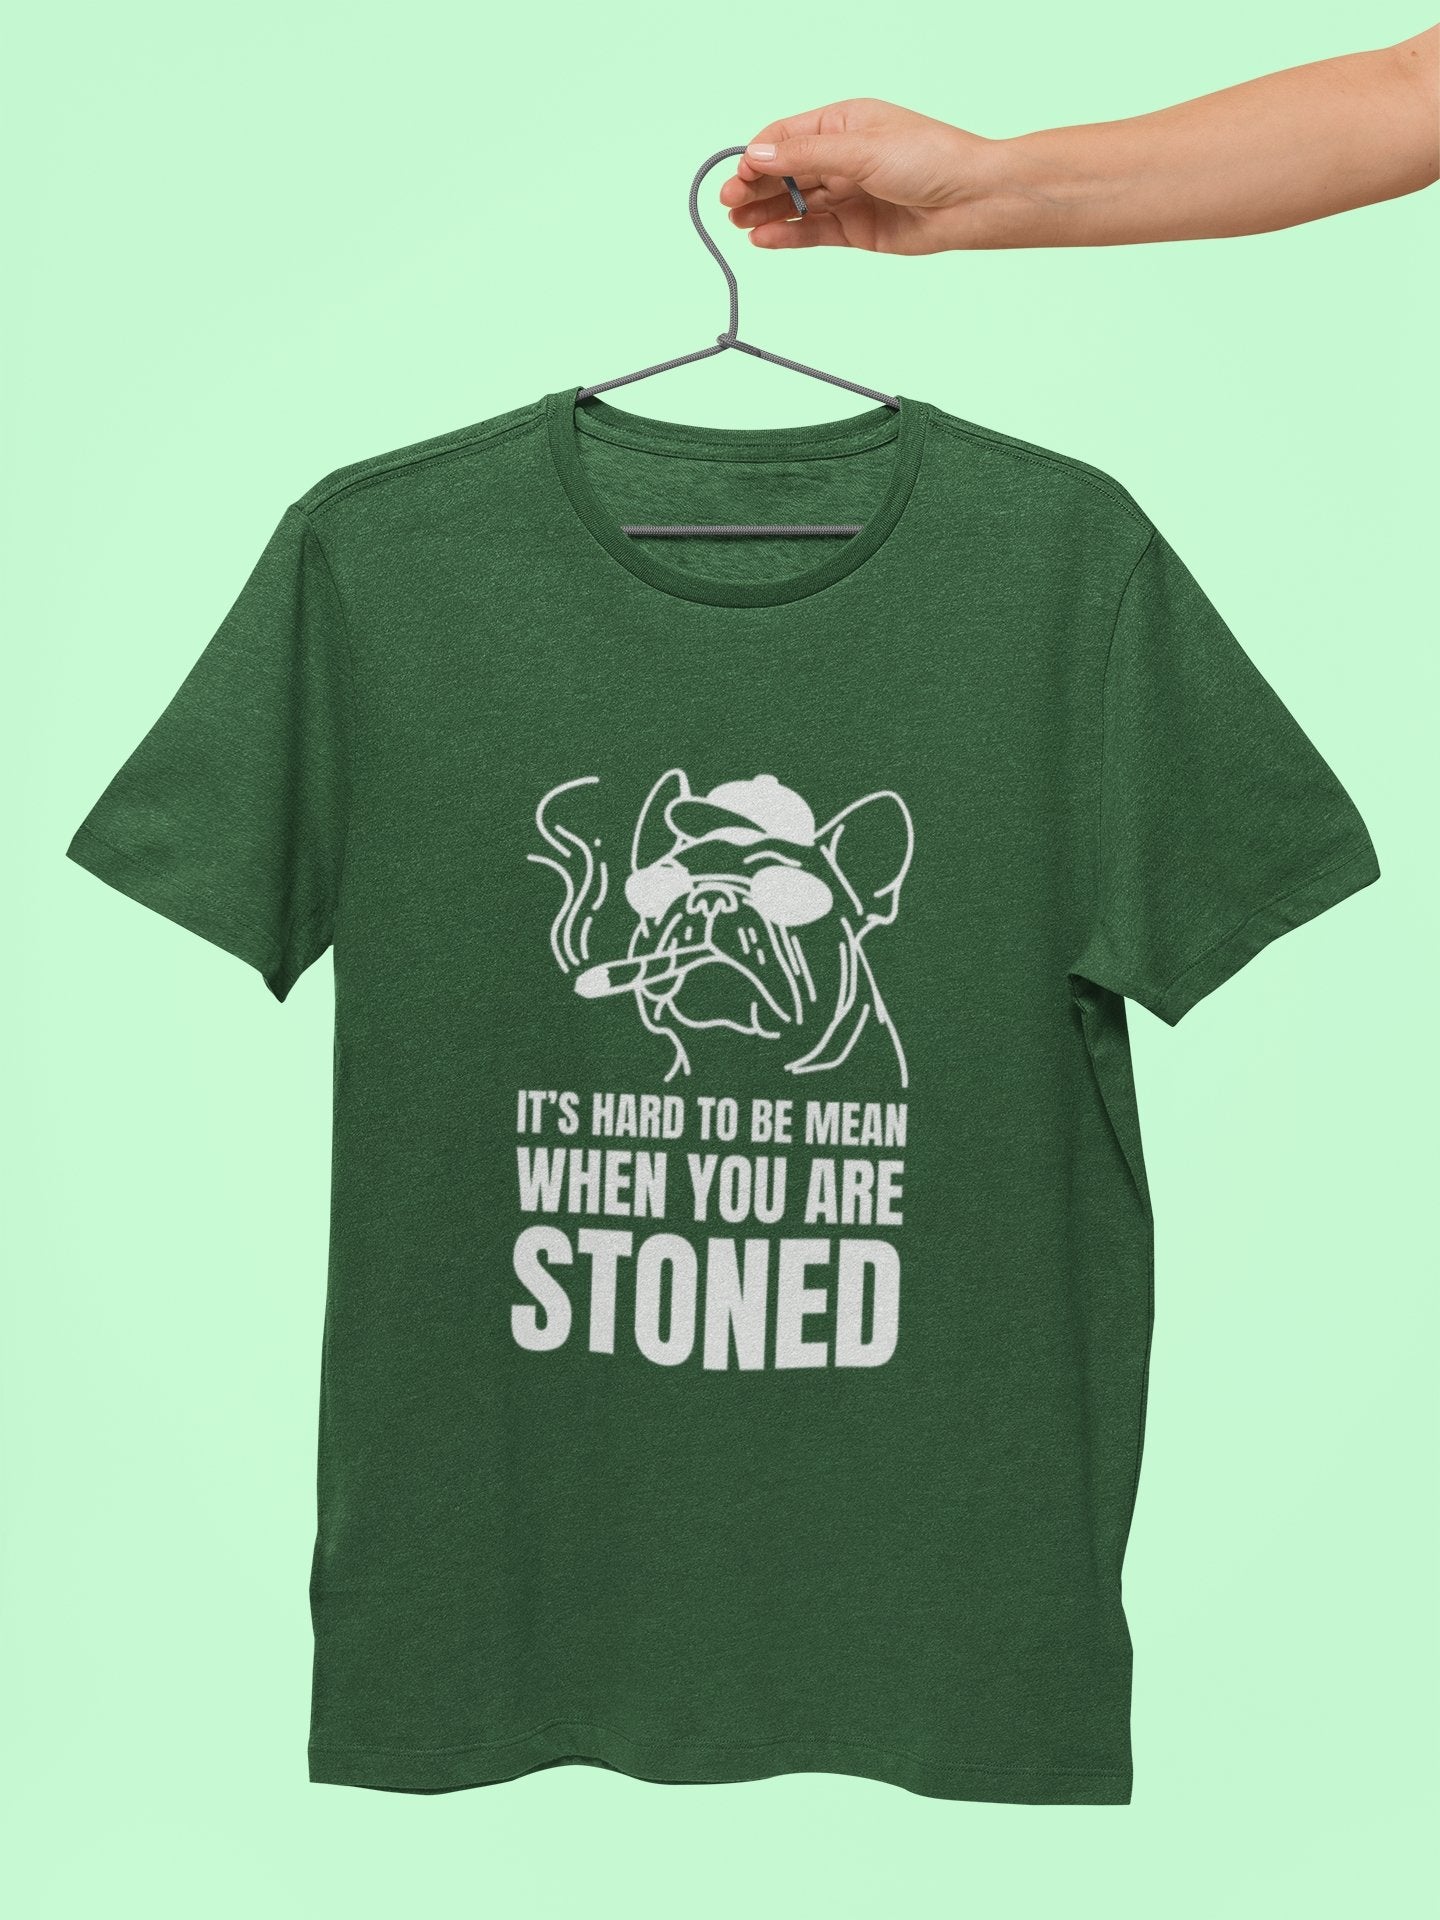 Hard to be Mean When You Are Stoned T shirt - Insane Tees